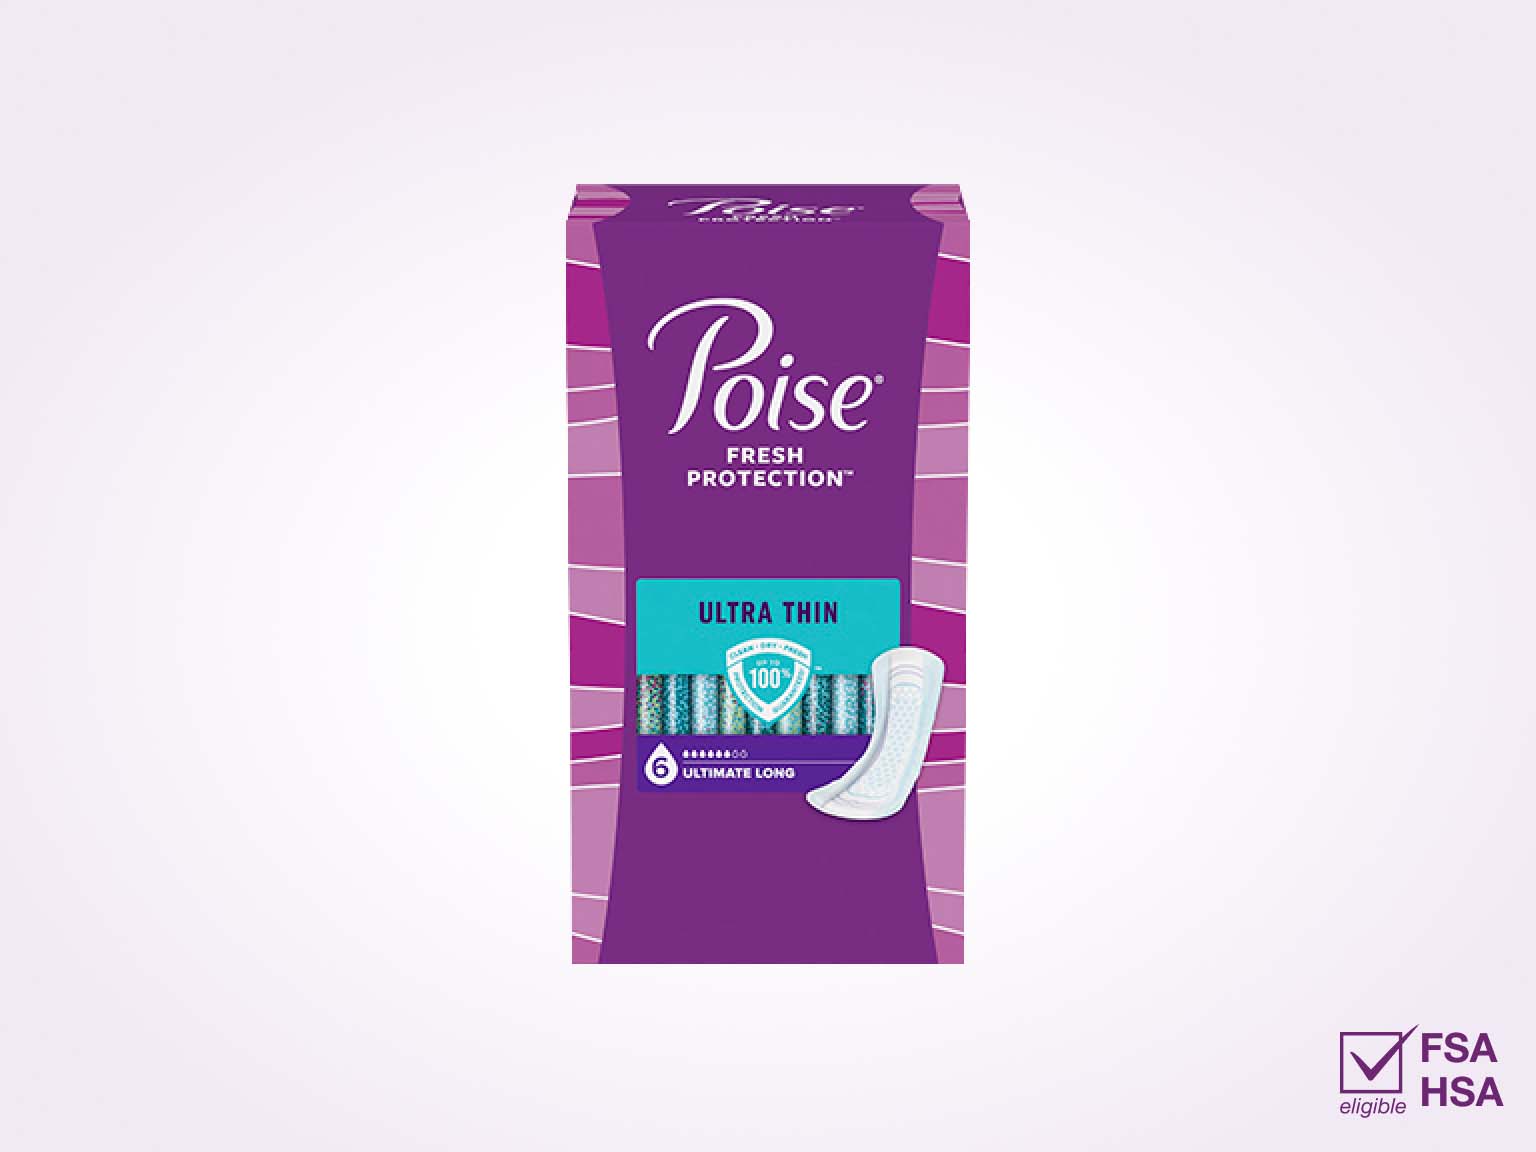 https://www.poise.com/-/media/feature/poise/na/us/product/plp/product/desktop/ultra-thin---no-wing-6-drop-ultimate-long-length-9.jpg?rev=ef6eec291d1442409ff07ea219d1b9f6